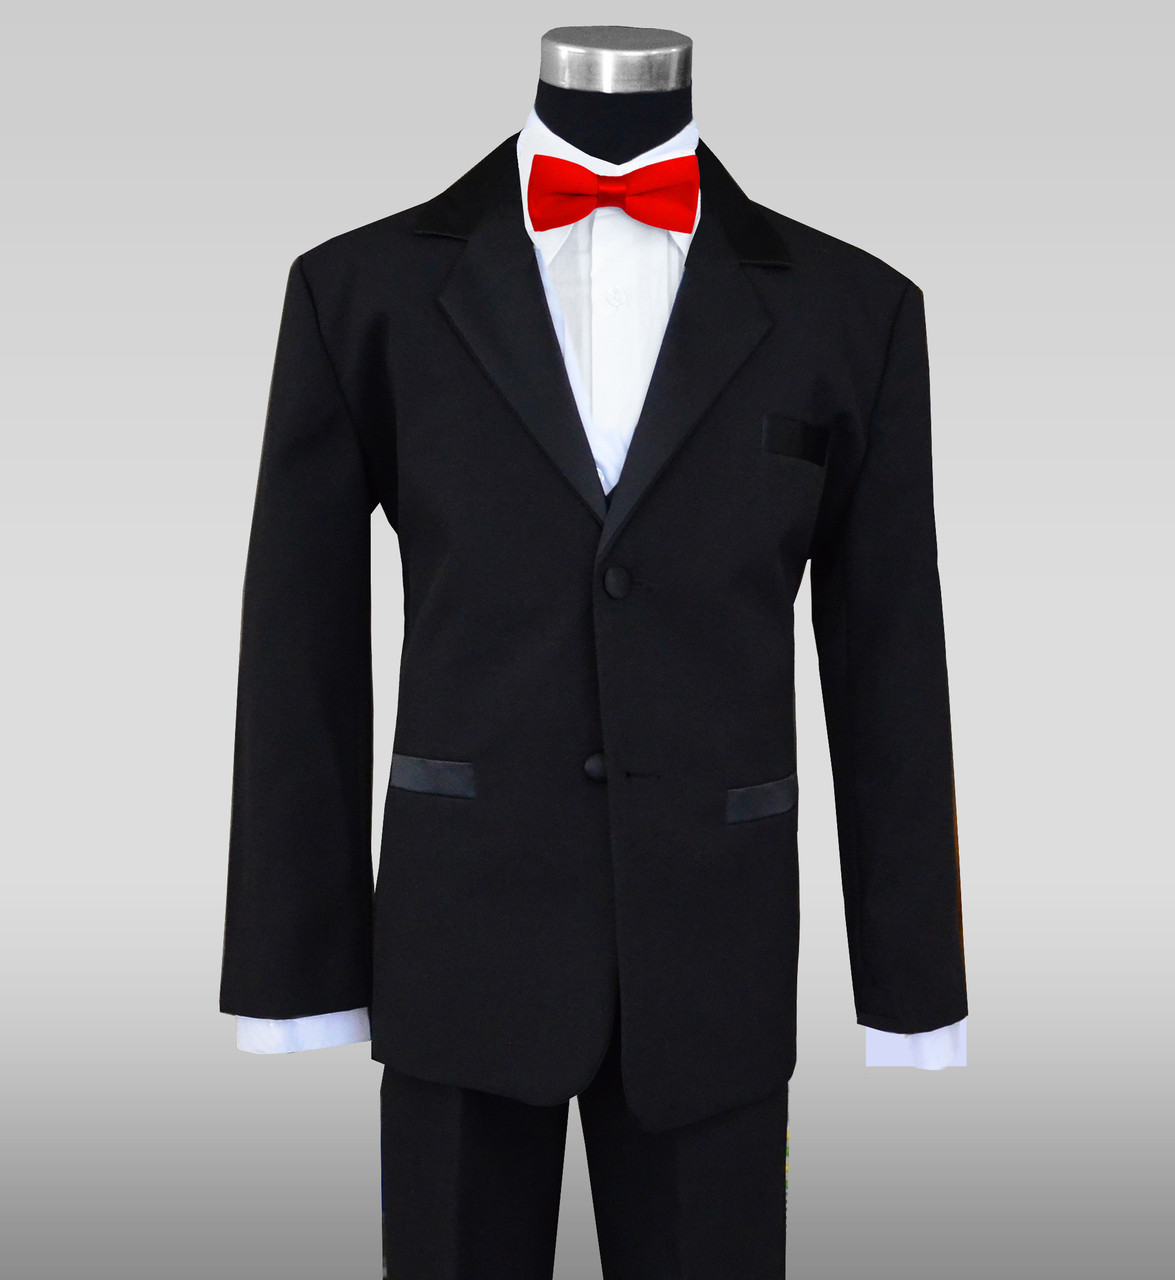 Boys Tuxedos In Black With Red Slim Bow Tie - black and white bow tie roblox